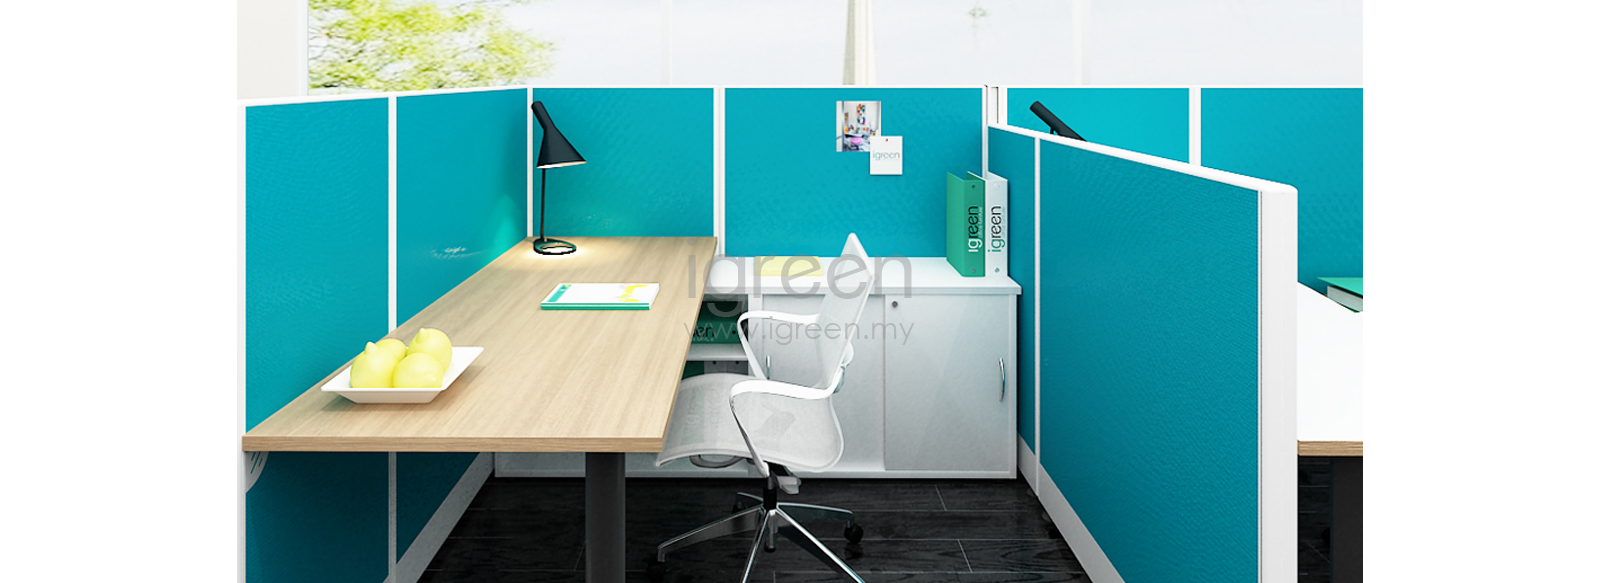 Been® Zen White Decoration Concept Office Table Malaysia